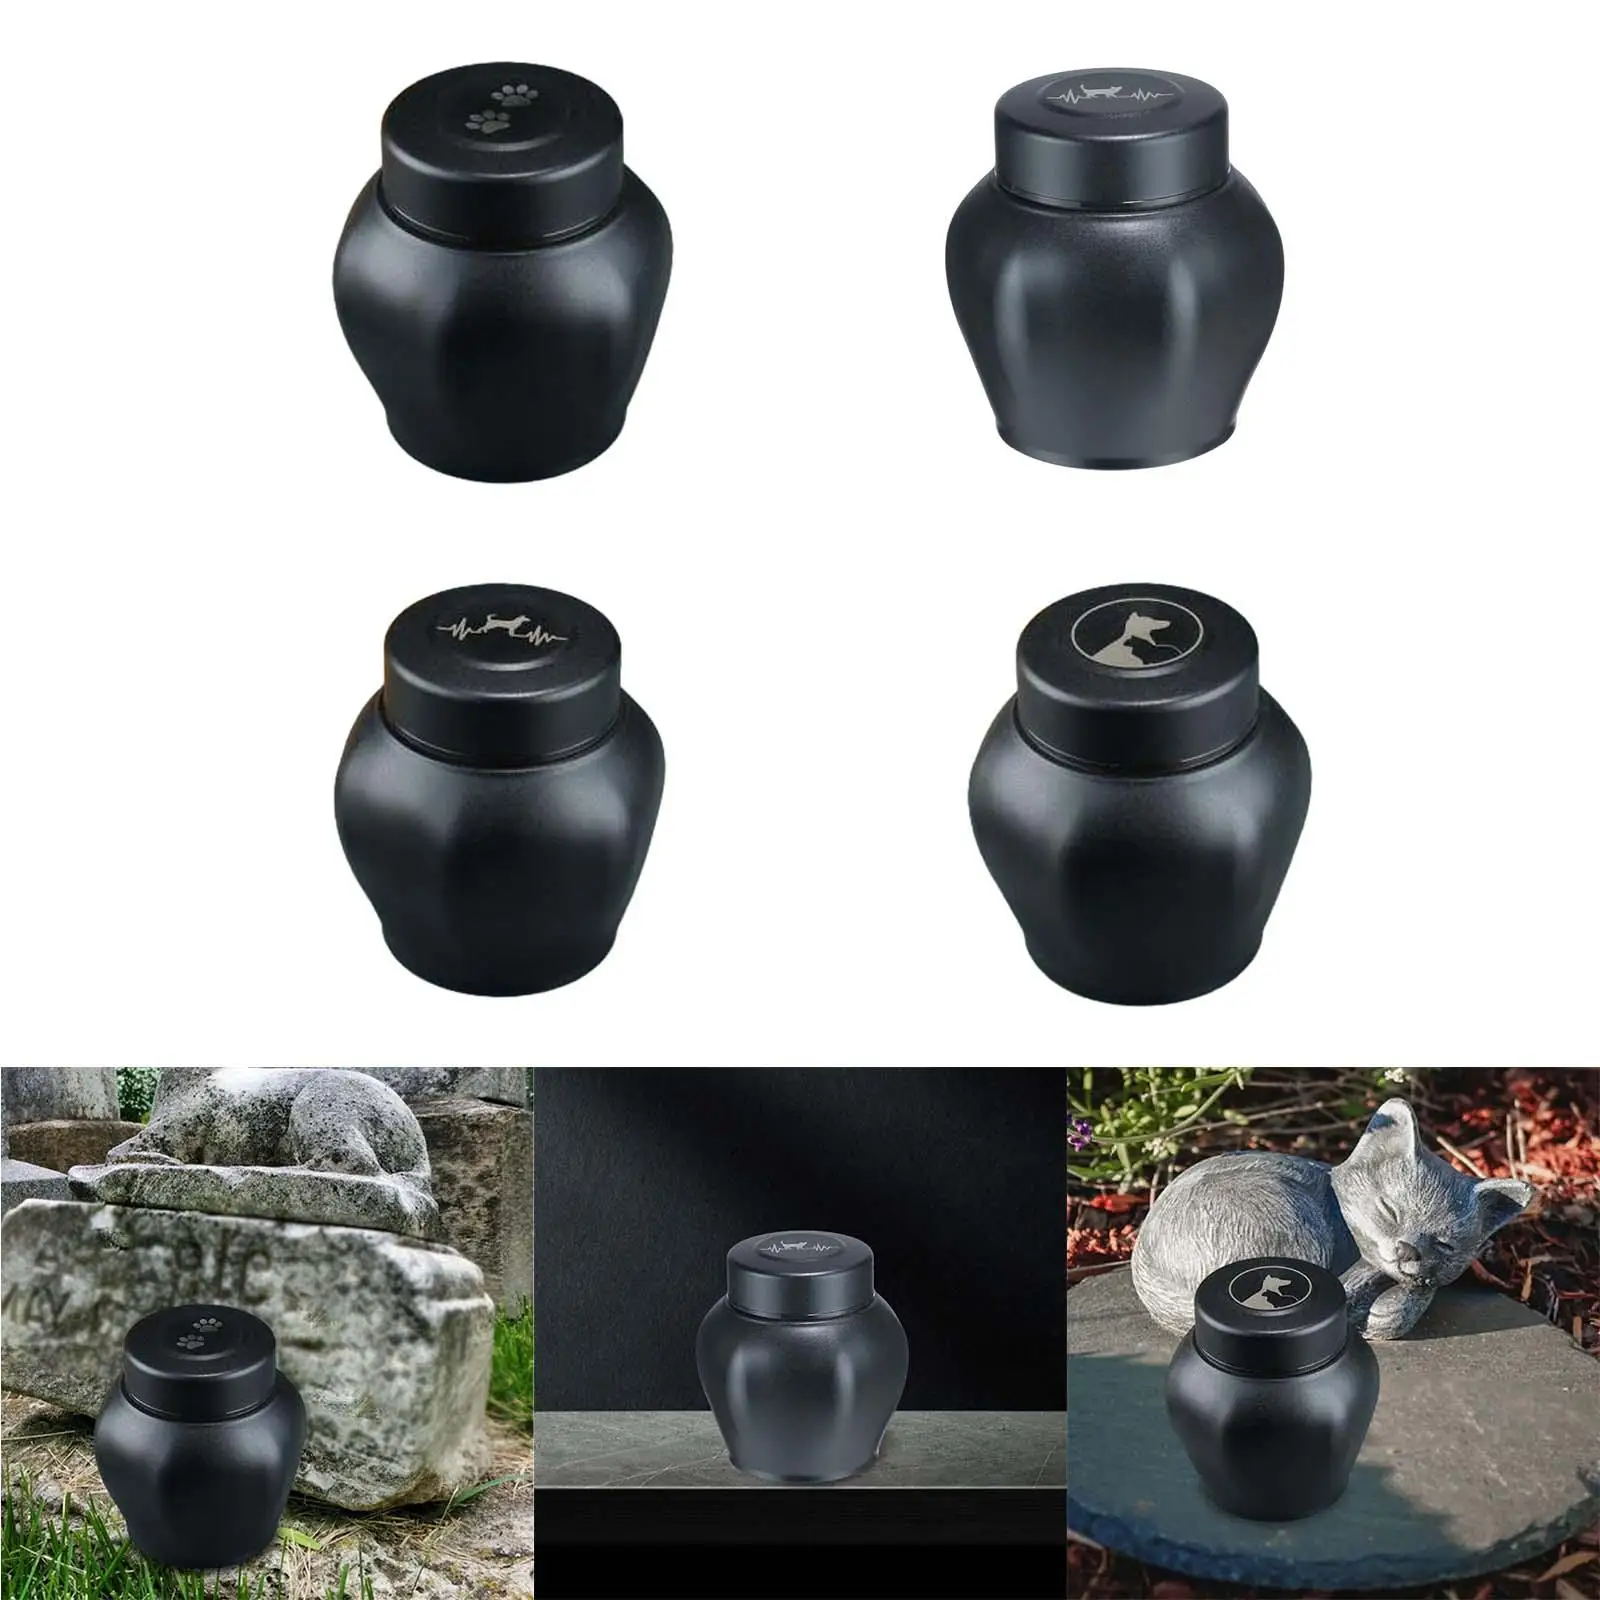 Cat Ash Holder Storage Container Small Cremation Urn Memorial Keepsake Urns for Bunny Puppy Rabbit Small Animals Dogs Cats